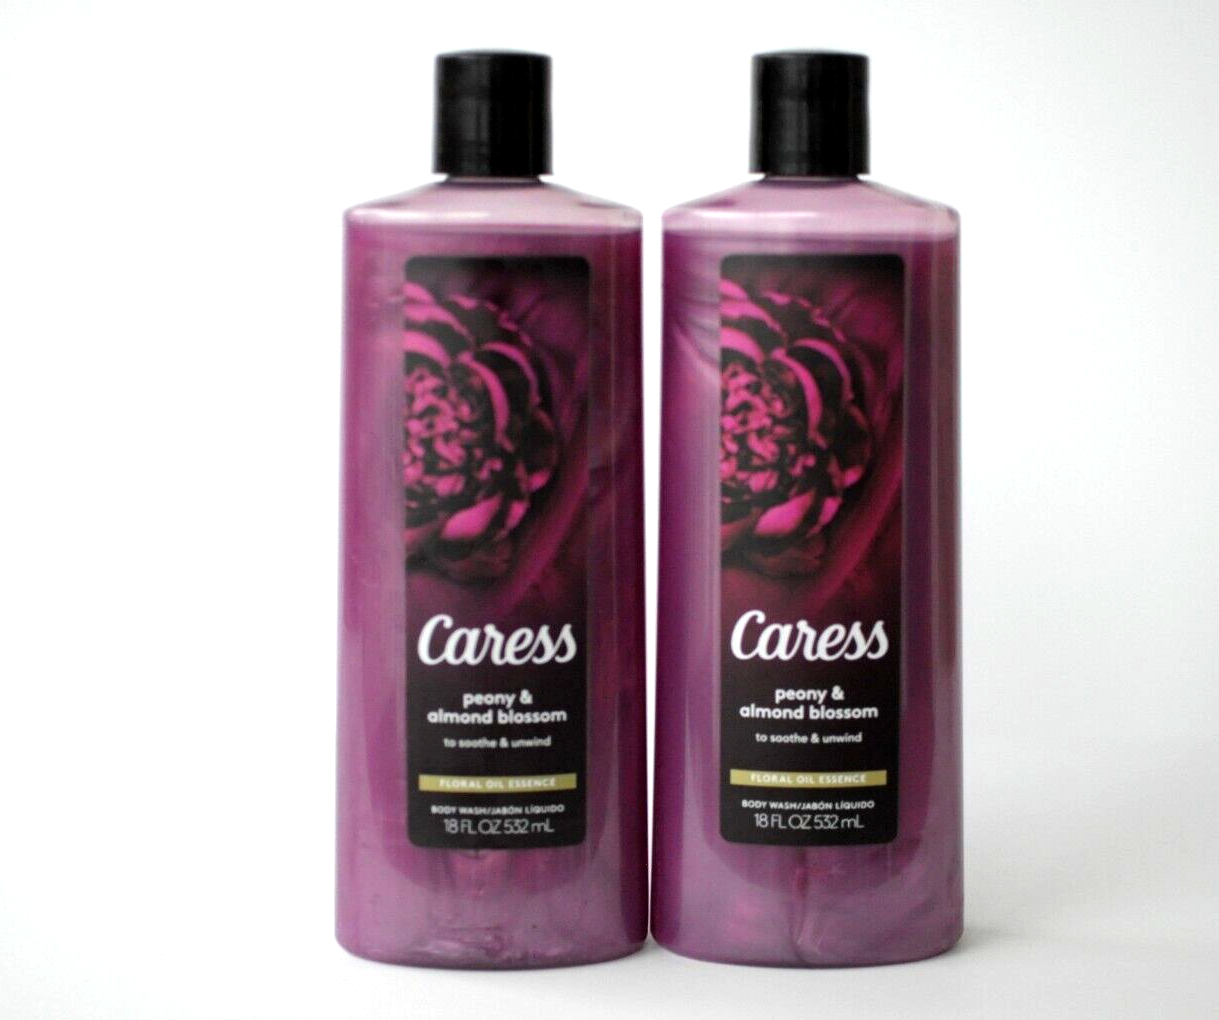 Primary image for Caress Peony and Almond Blossom Soothe Unwind Floral Body Wash 18 oz Lot of 2